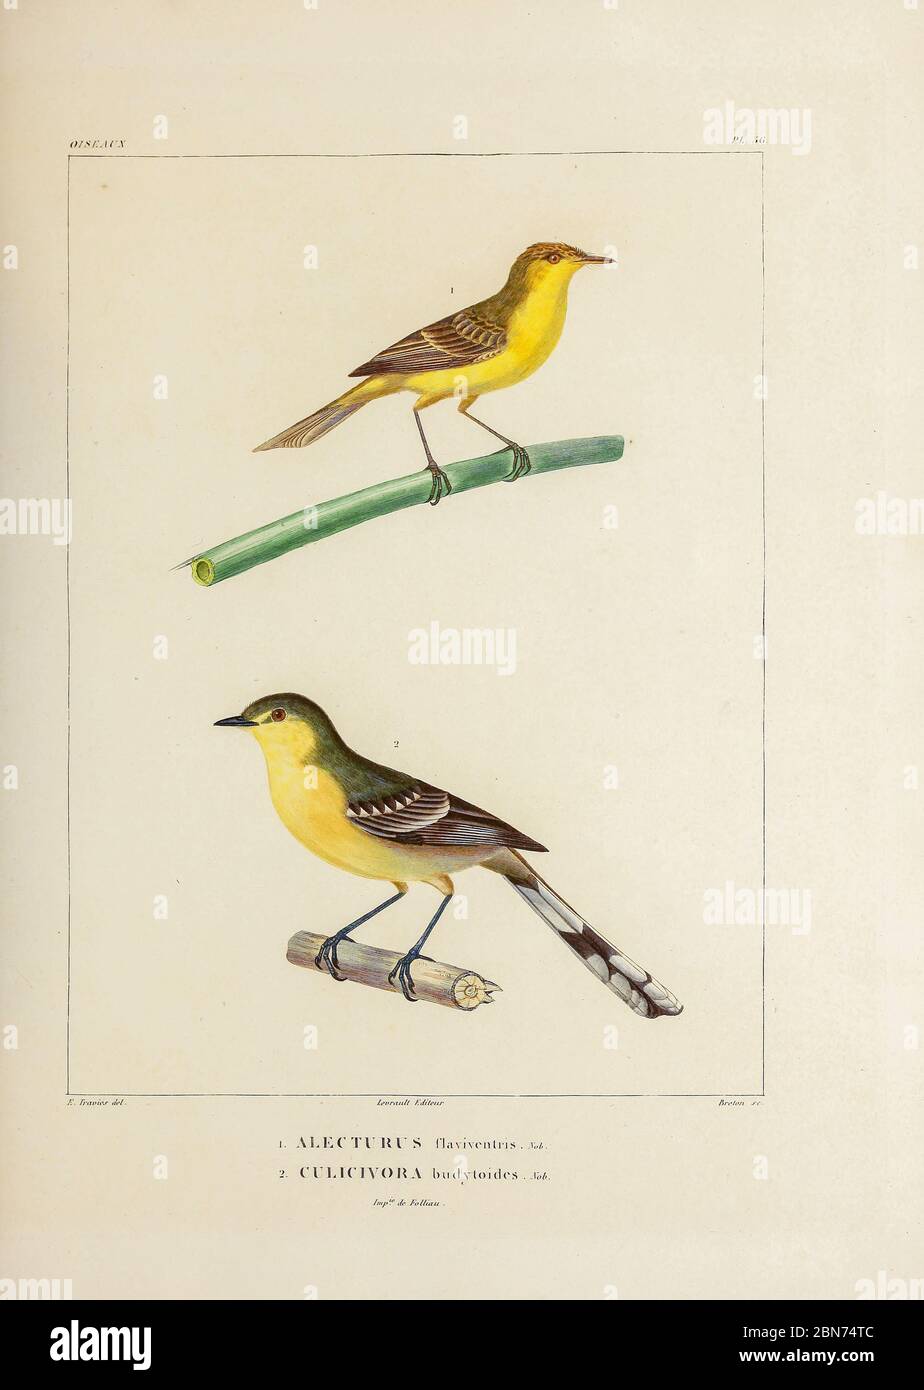 hand coloured sketch Top: crested doradito (Pseudocolopteryx sclateri [Here as Alecturus flaviventris]) Bottom: greater wagtail-tyrant (Stigmatura budytoides  [Here as Culicivora budytoides]) From the book 'Voyage dans l'Amérique Méridionale' [Journey to South America: (Brazil, the eastern republic of Uruguay, the Argentine Republic, Patagonia, the republic of Chile, the republic of Bolivia, the republic of Peru), executed during the years 1826 - 1833] 4th volume Part 3 By: Orbigny, Alcide Dessalines d', d'Orbigny, 1802-1857; Montagne, Jean François Camille, 1784-1866; Martius, Karl Friedrich Stock Photo